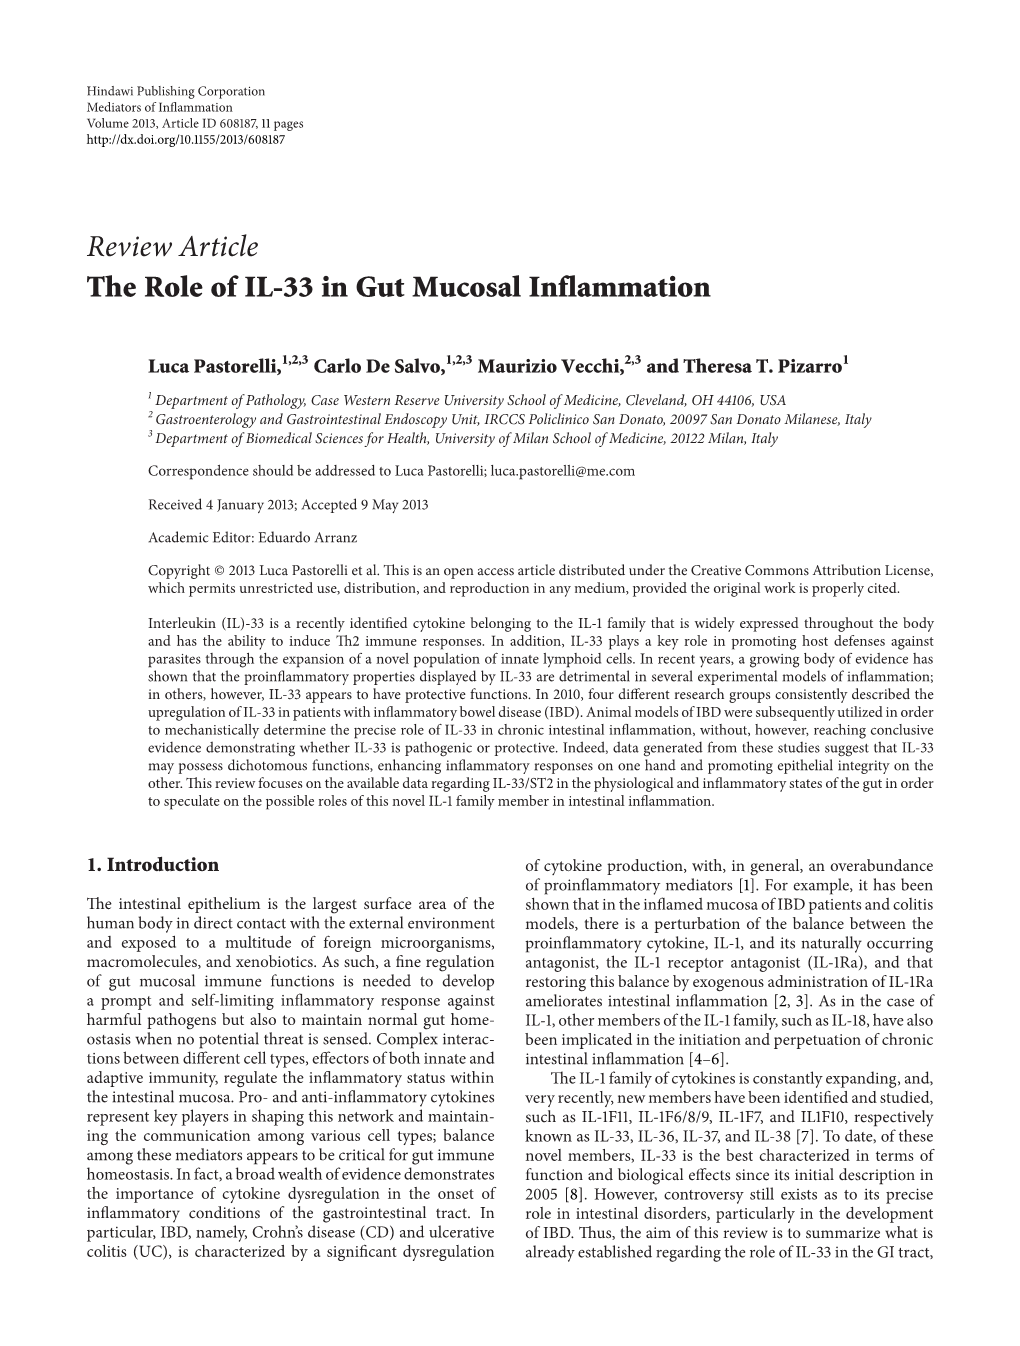 The Role of IL-33 in Gut Mucosal Inflammation